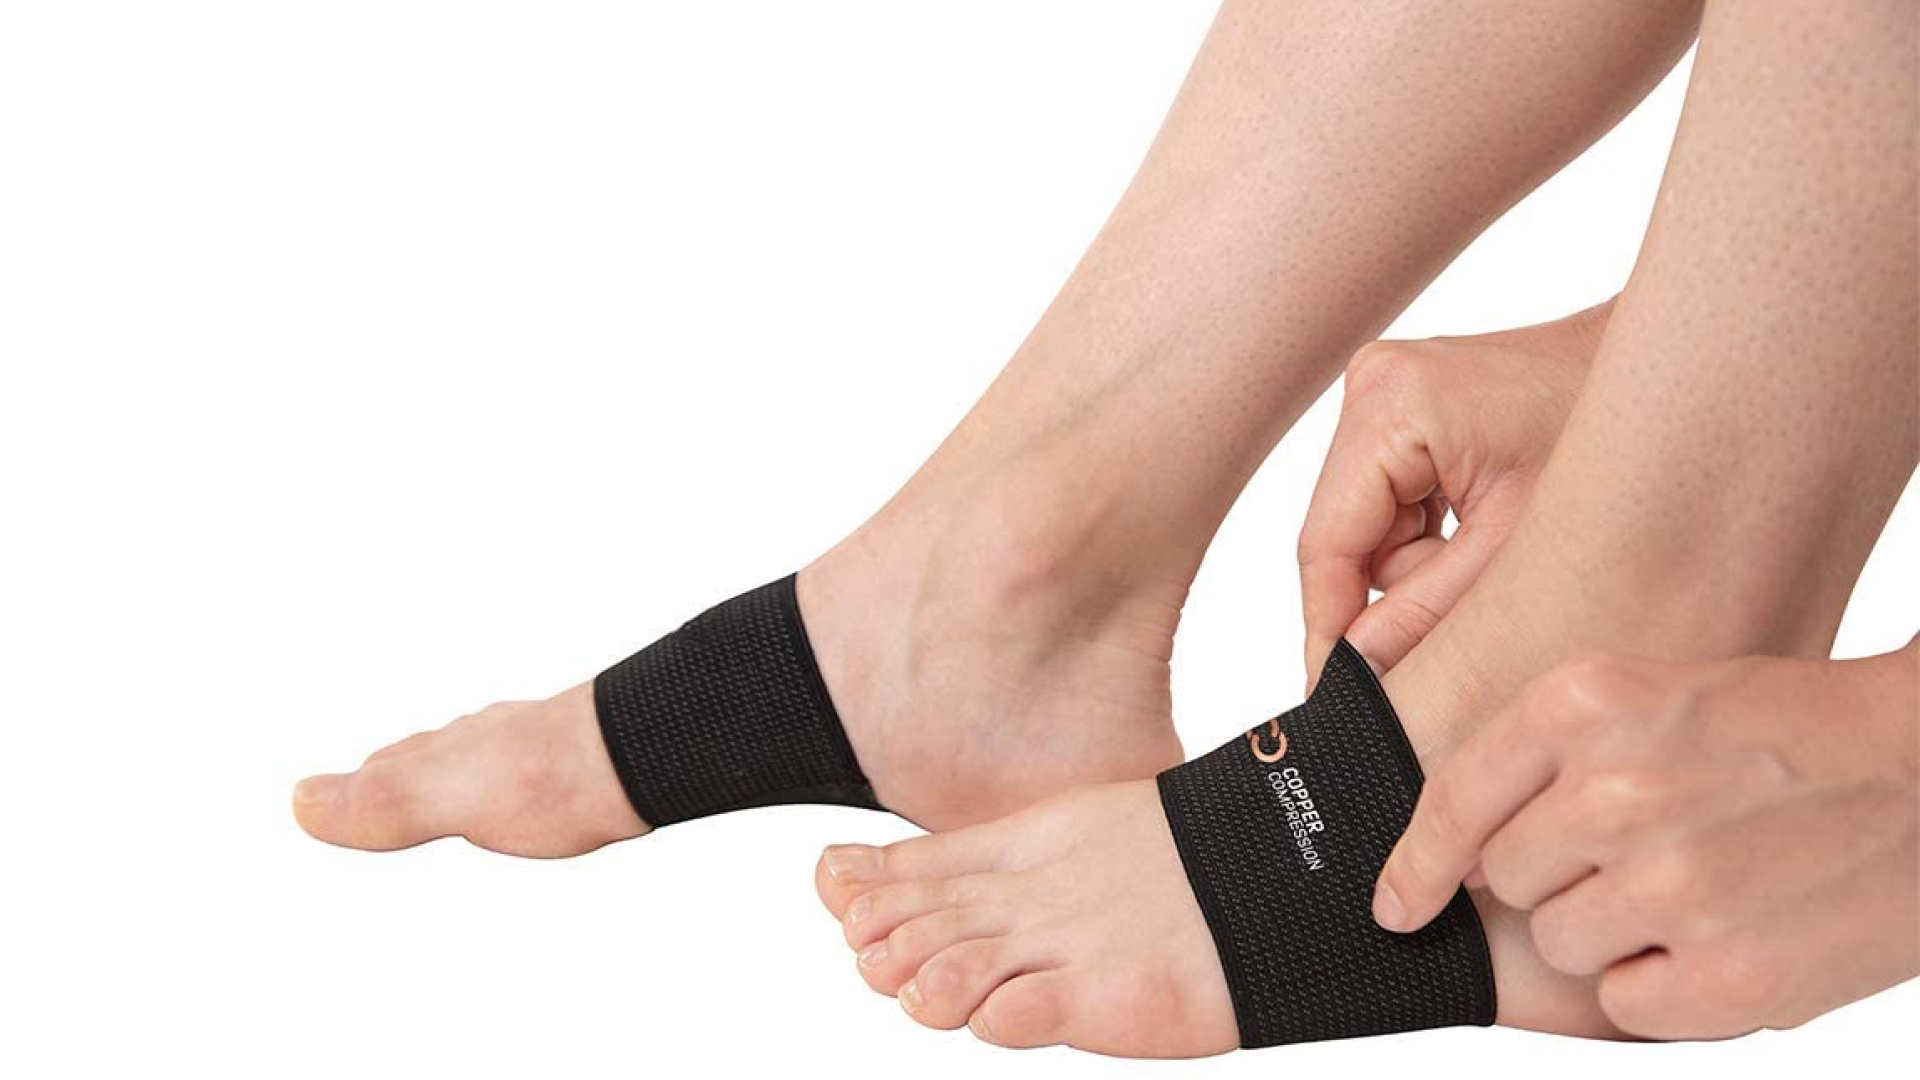 copper-infused arch support bands